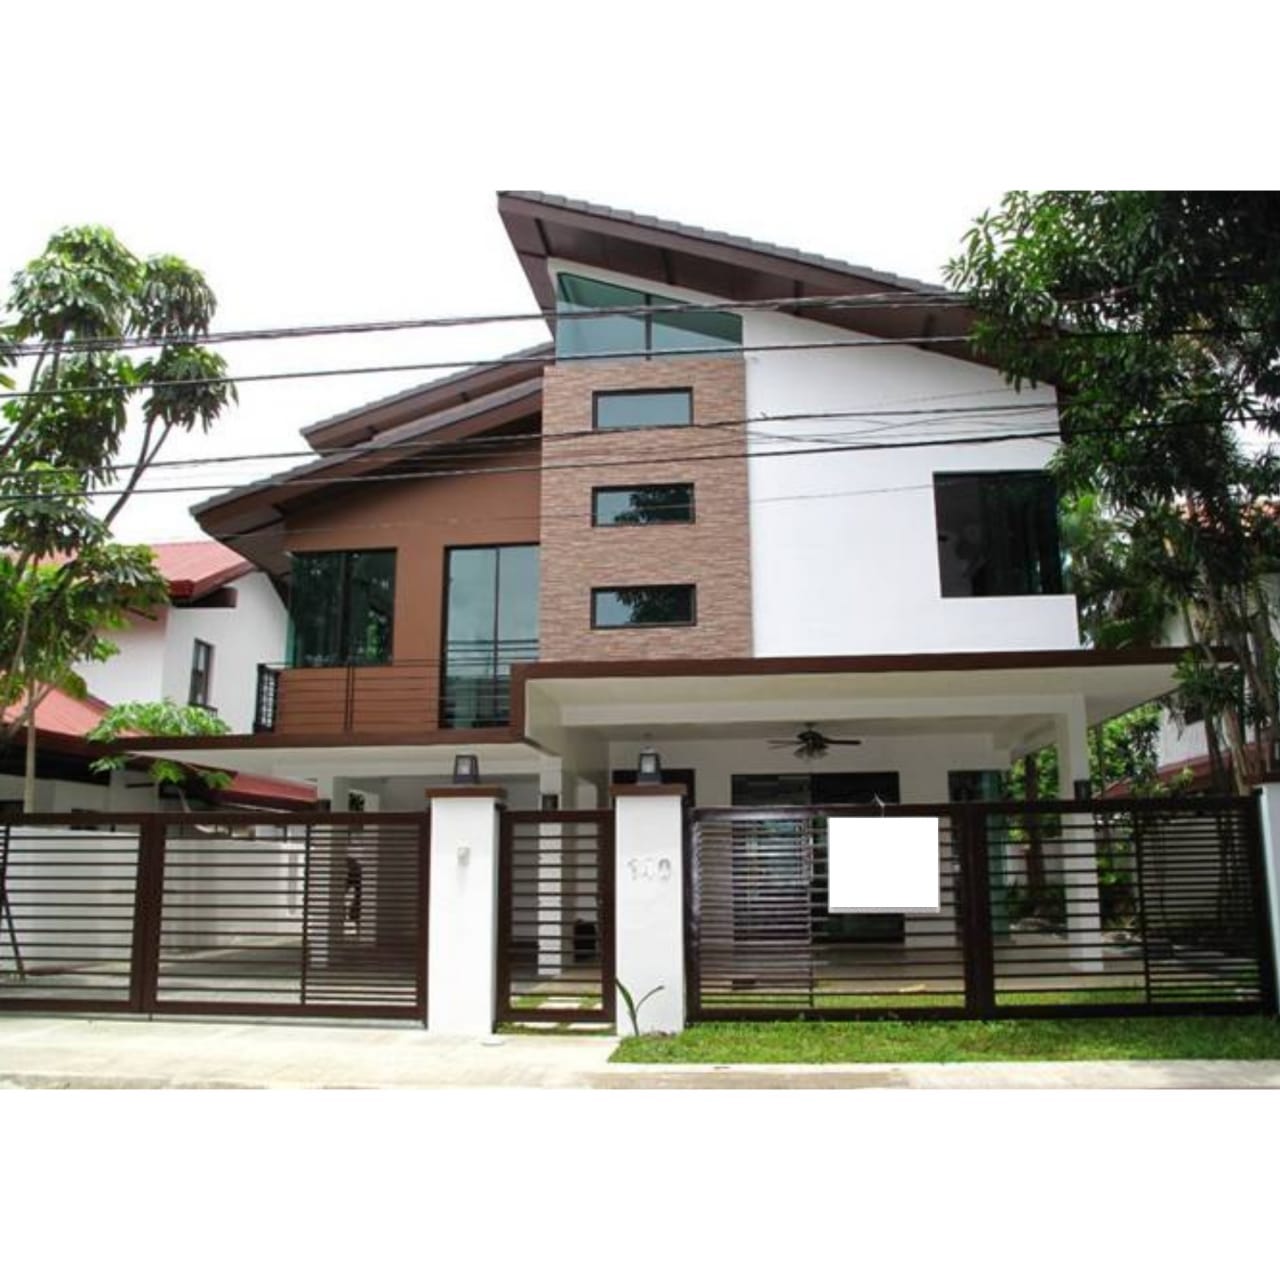 Live Here - House for Rent in Ayala Alabang Village, Muntinlupa City